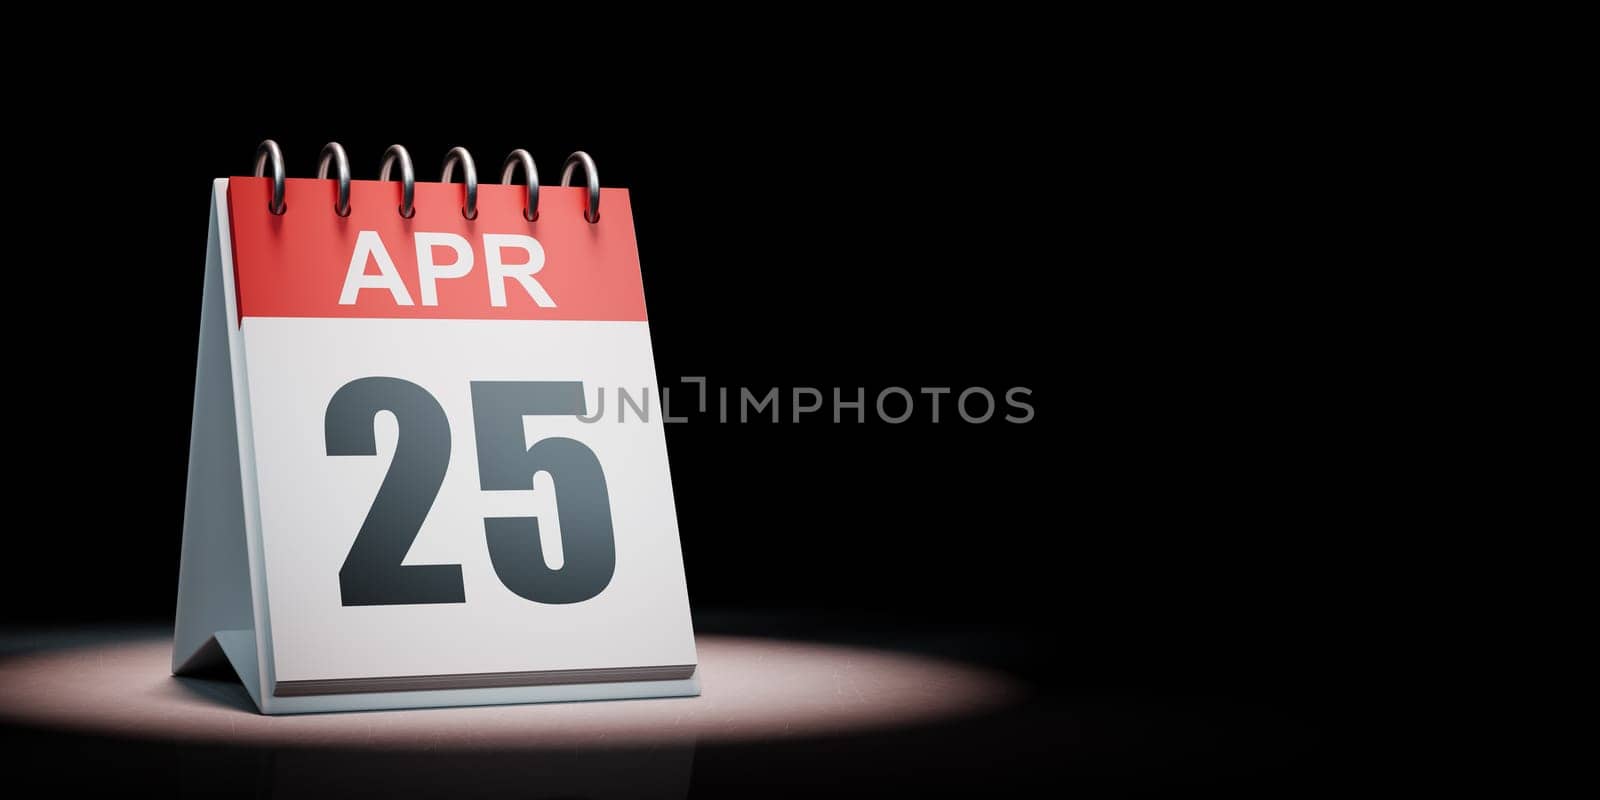 Red and White April 25 Desk Calendar Spotlighted on Black Background with Copy Space 3D Illustration